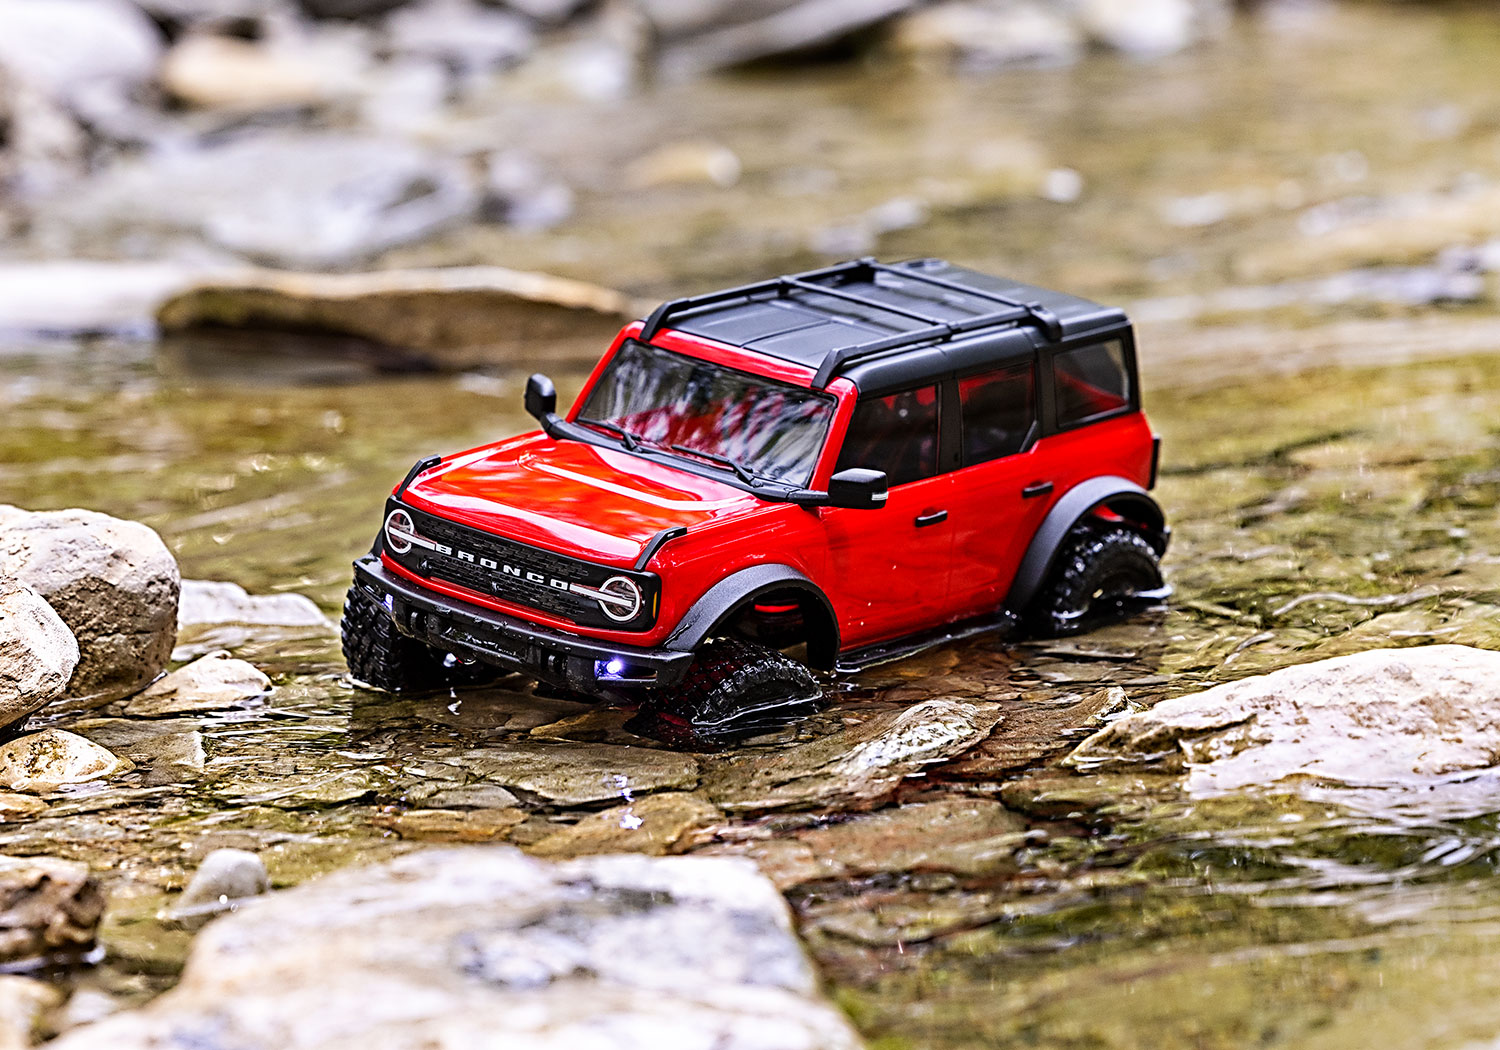 Traxxas TRX-4M 1/18 Scale and Trail Crawler Ford Bronco 4WD Electric Truck - Zwart